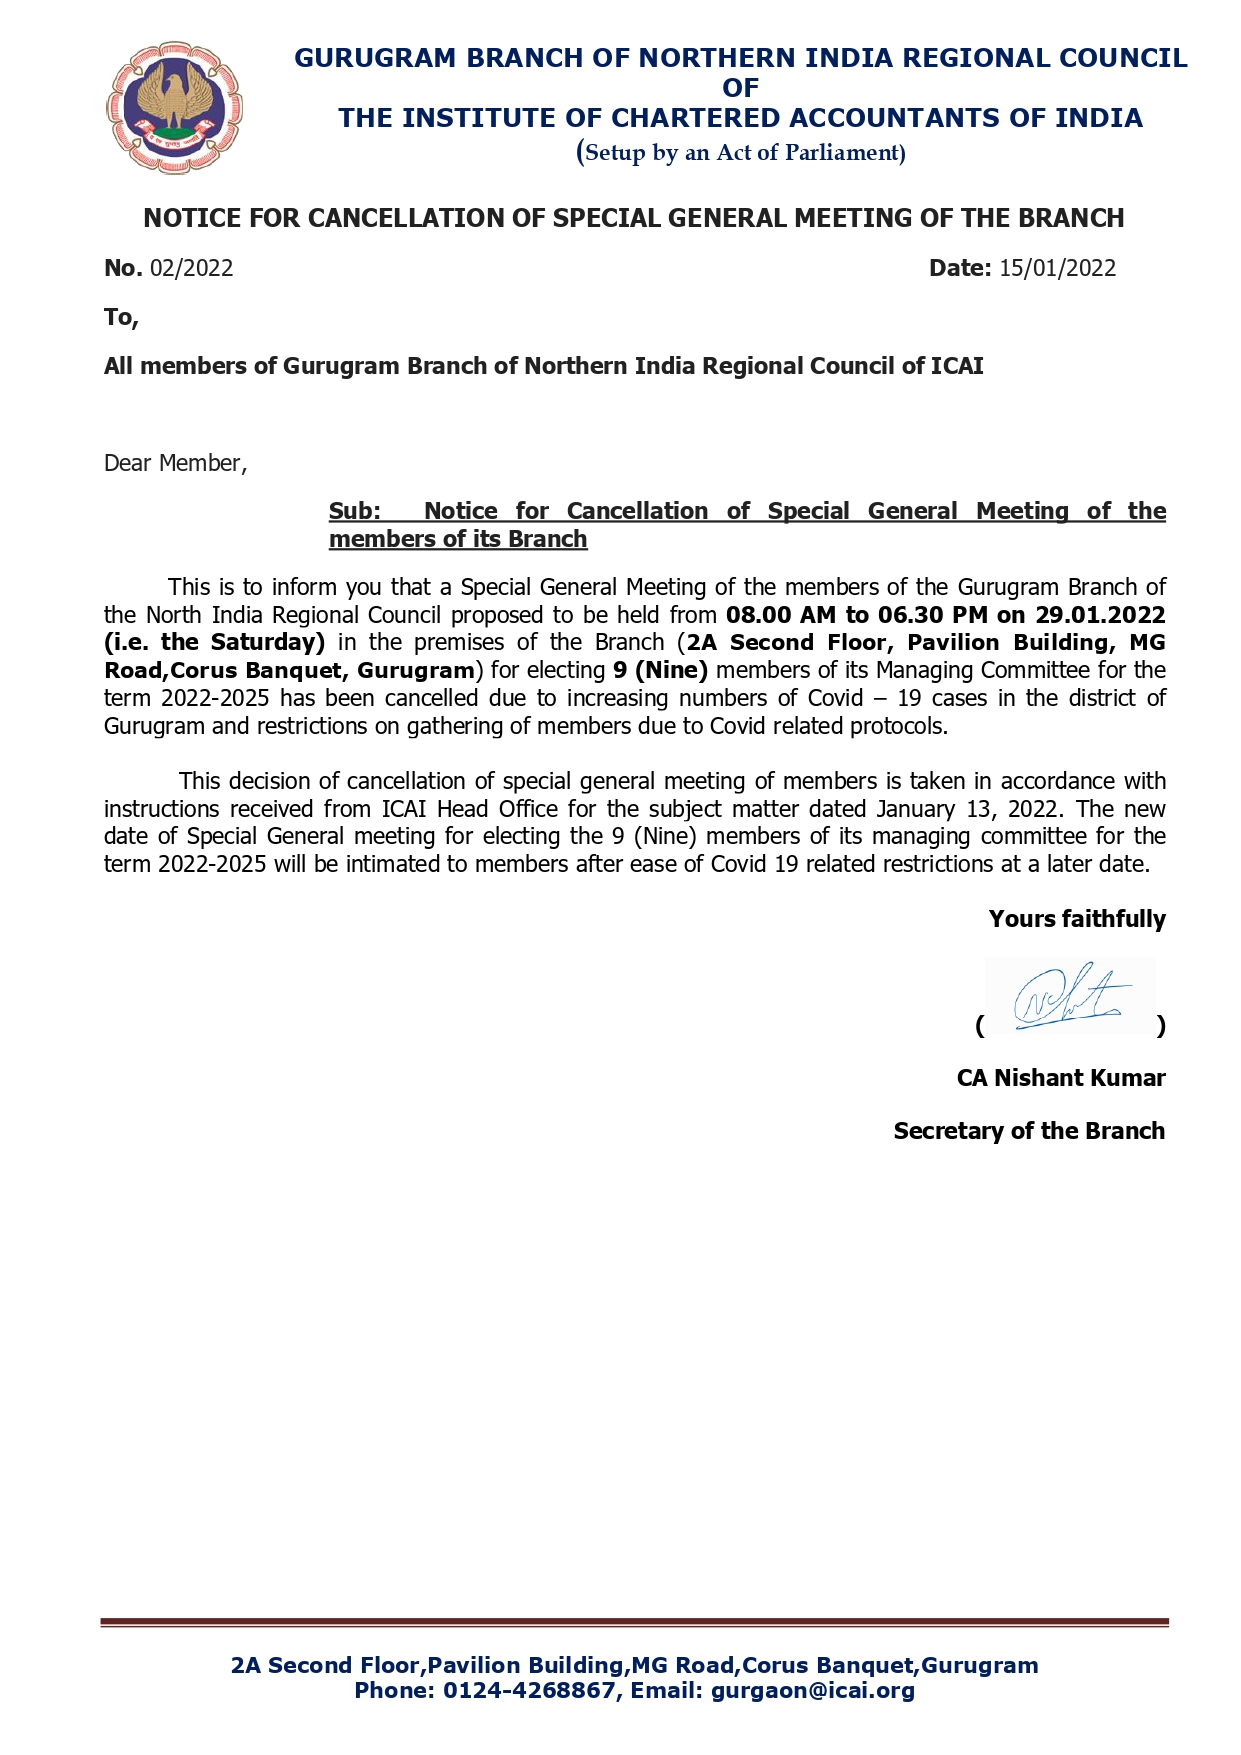 Notice for Cancellation of Special General Meeting of Gurugram Branch of NIRC of ICAI